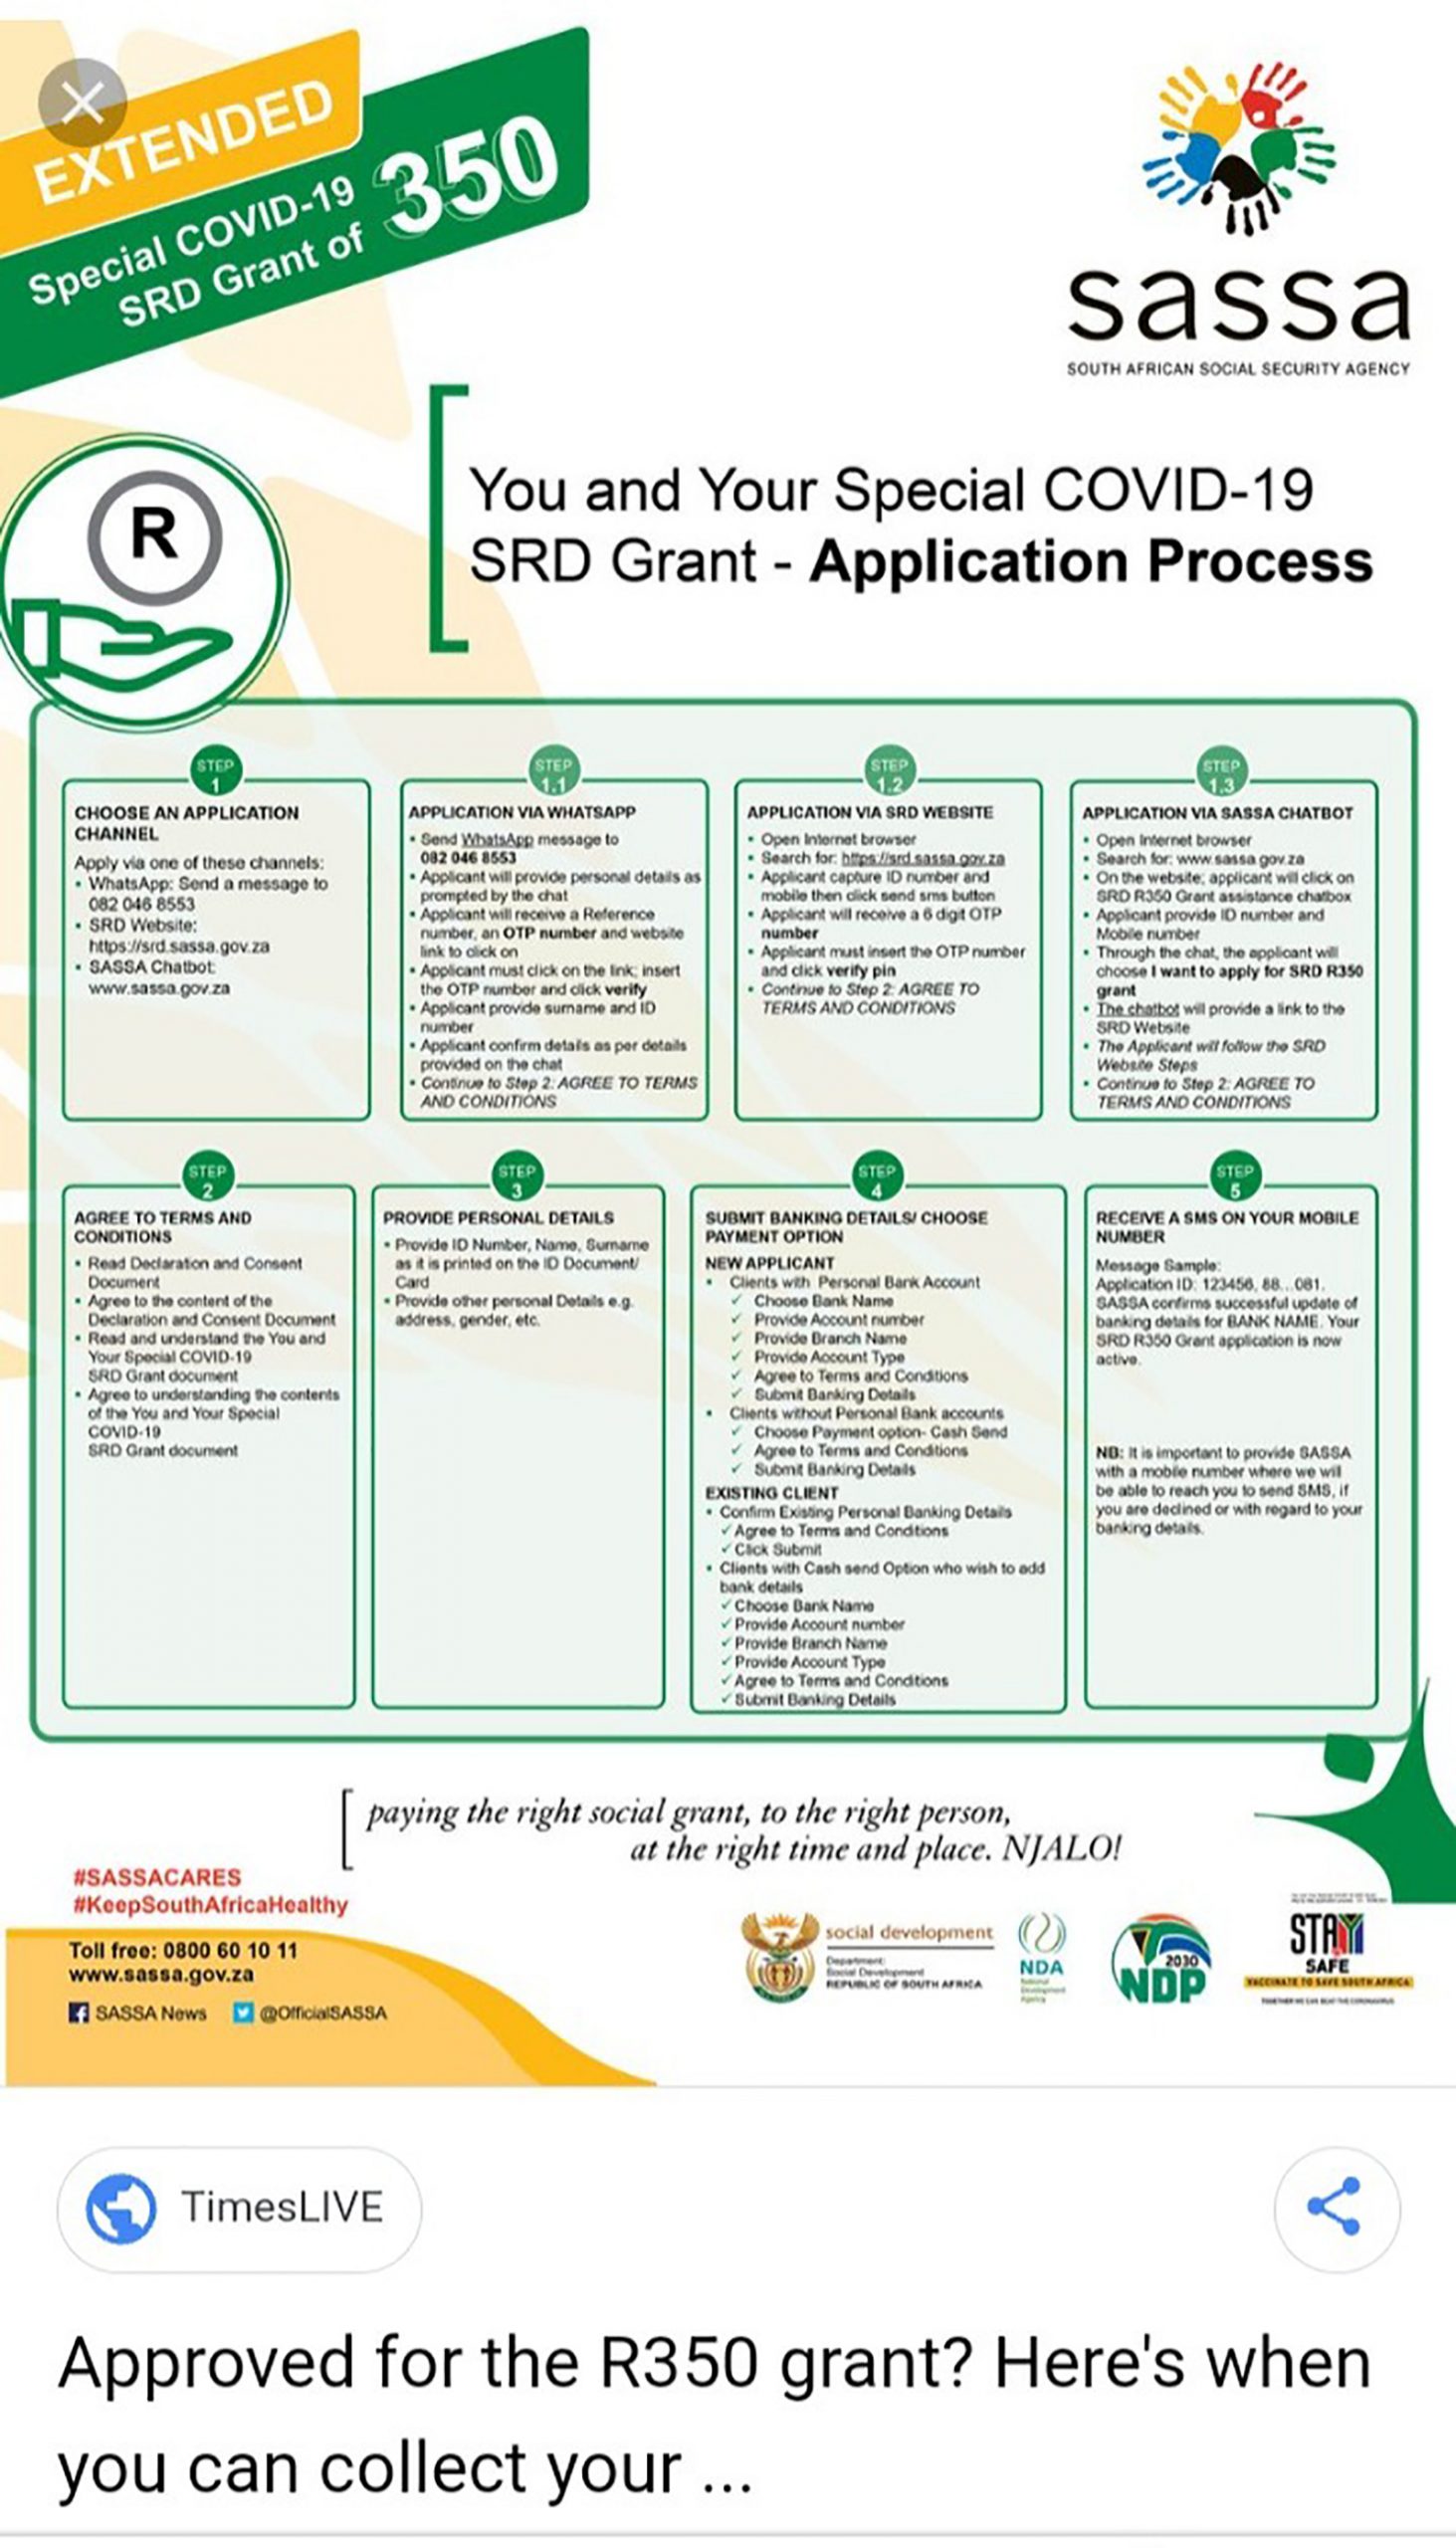 Log on Sassa page and check your status for June 1